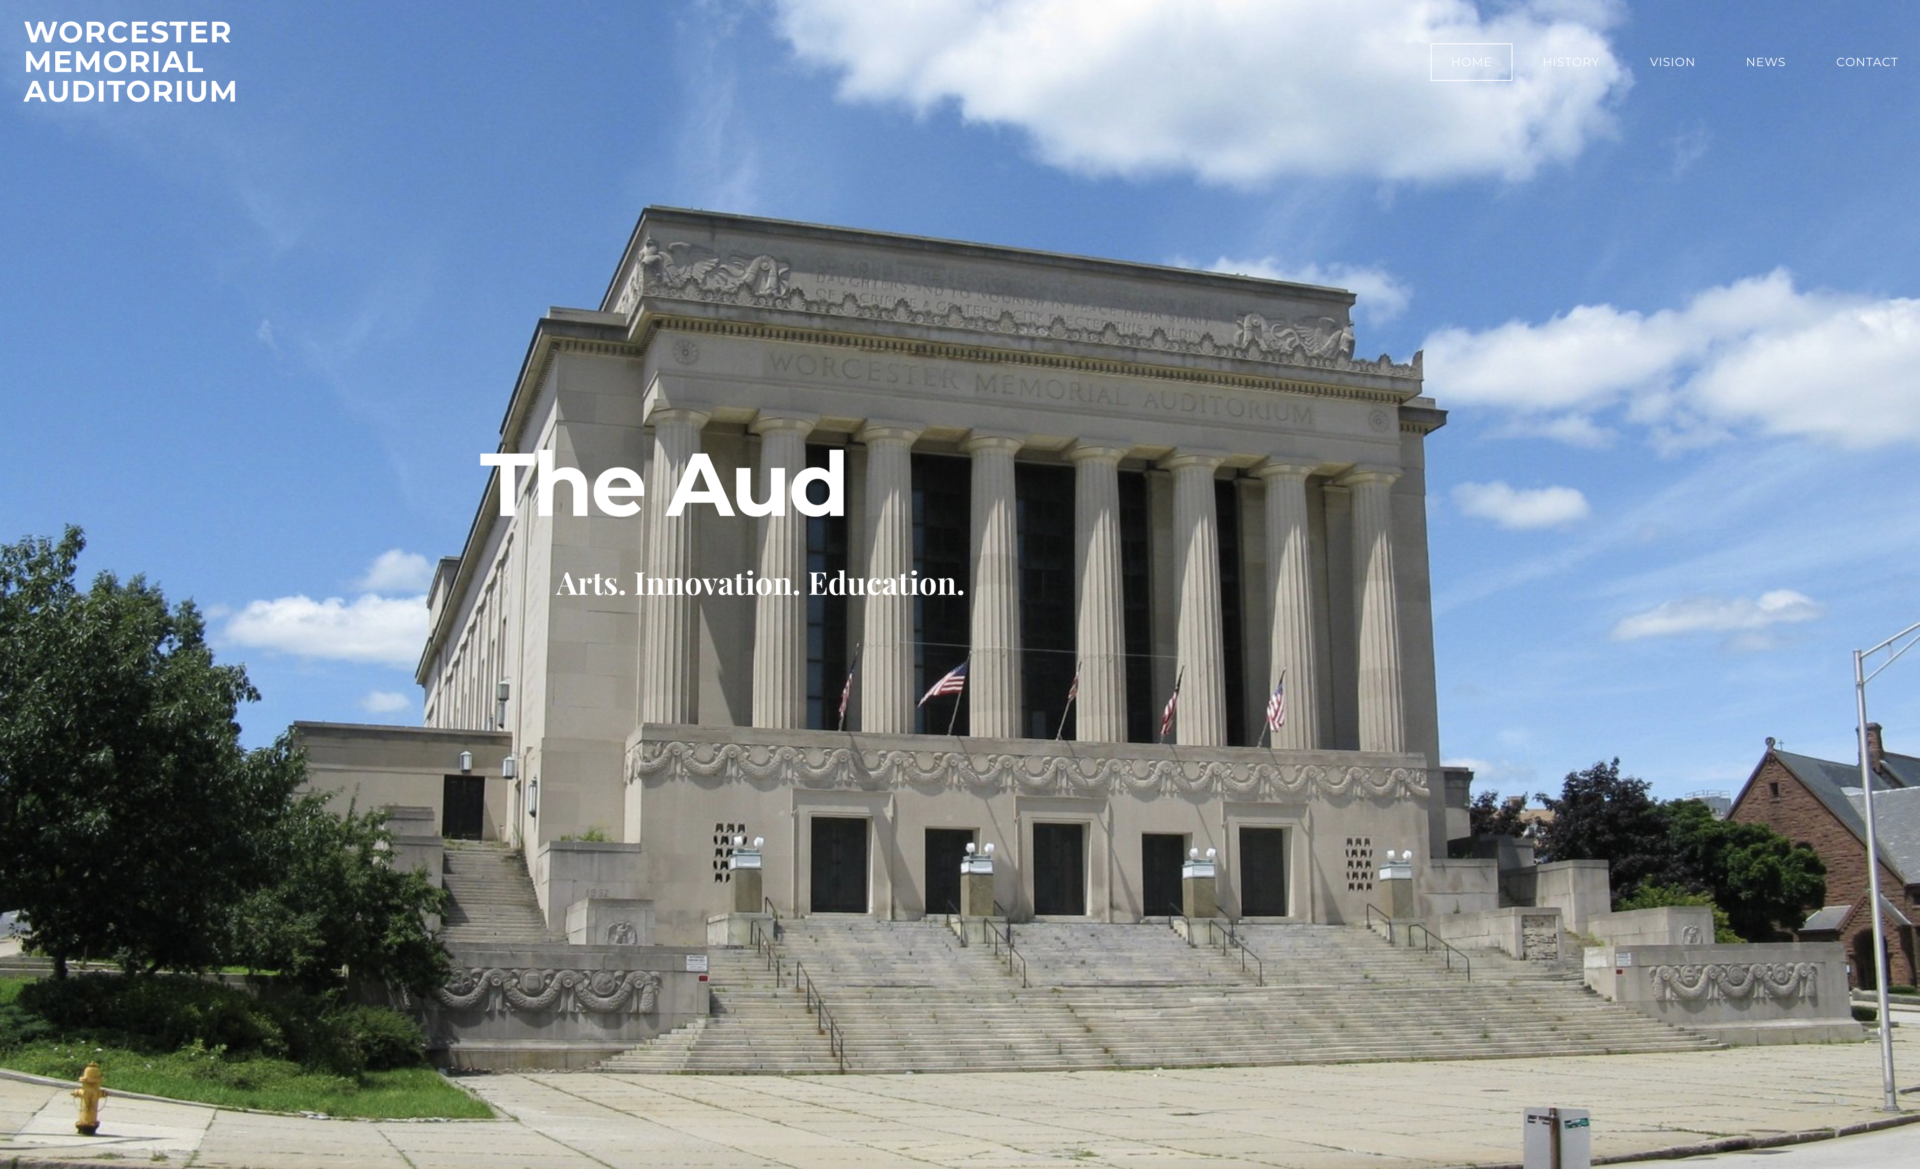 Homepage of the Worcester Memorial Auditorium website. The Architectural Heritage Foundation (AHF) is planning to preserve and redevelop the Aud.